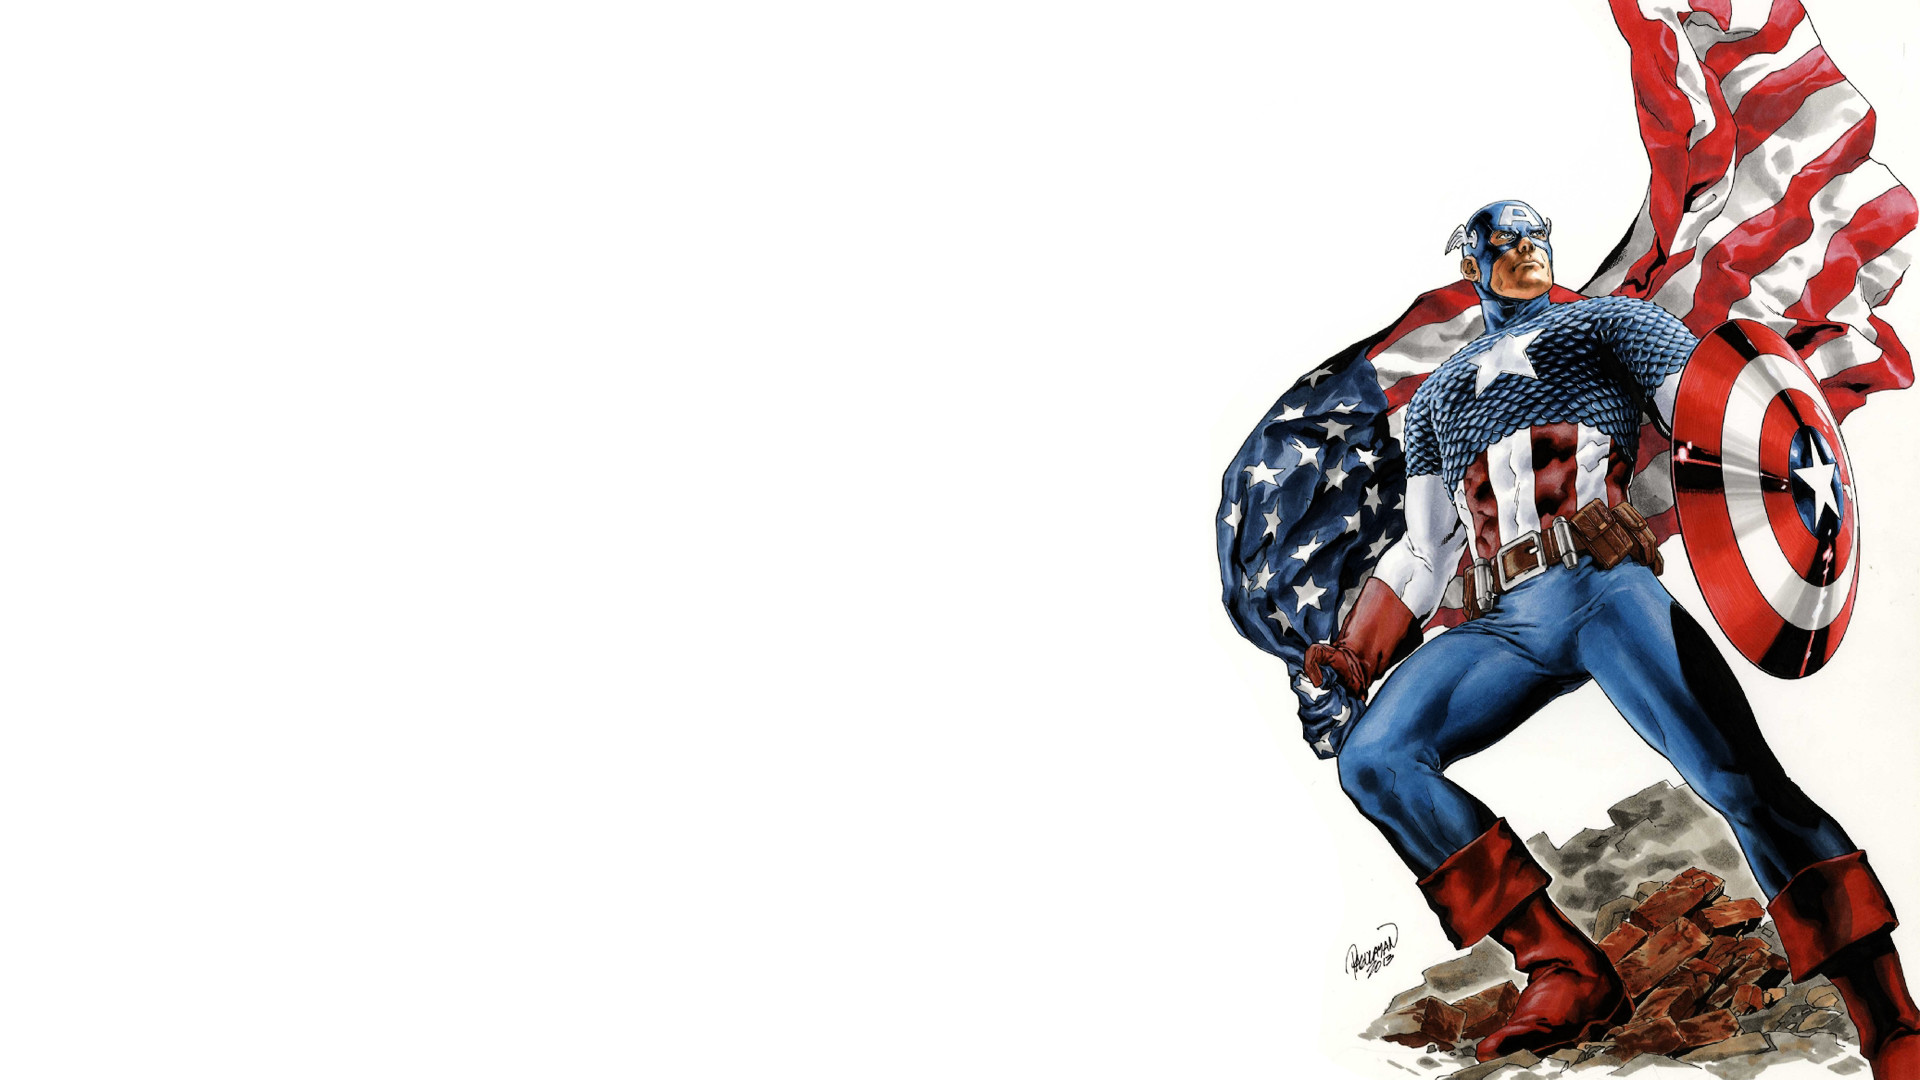 1920x1080 249 Captain America HD Wallpapers | Backgrounds - Wallpaper Abyss - Page 5